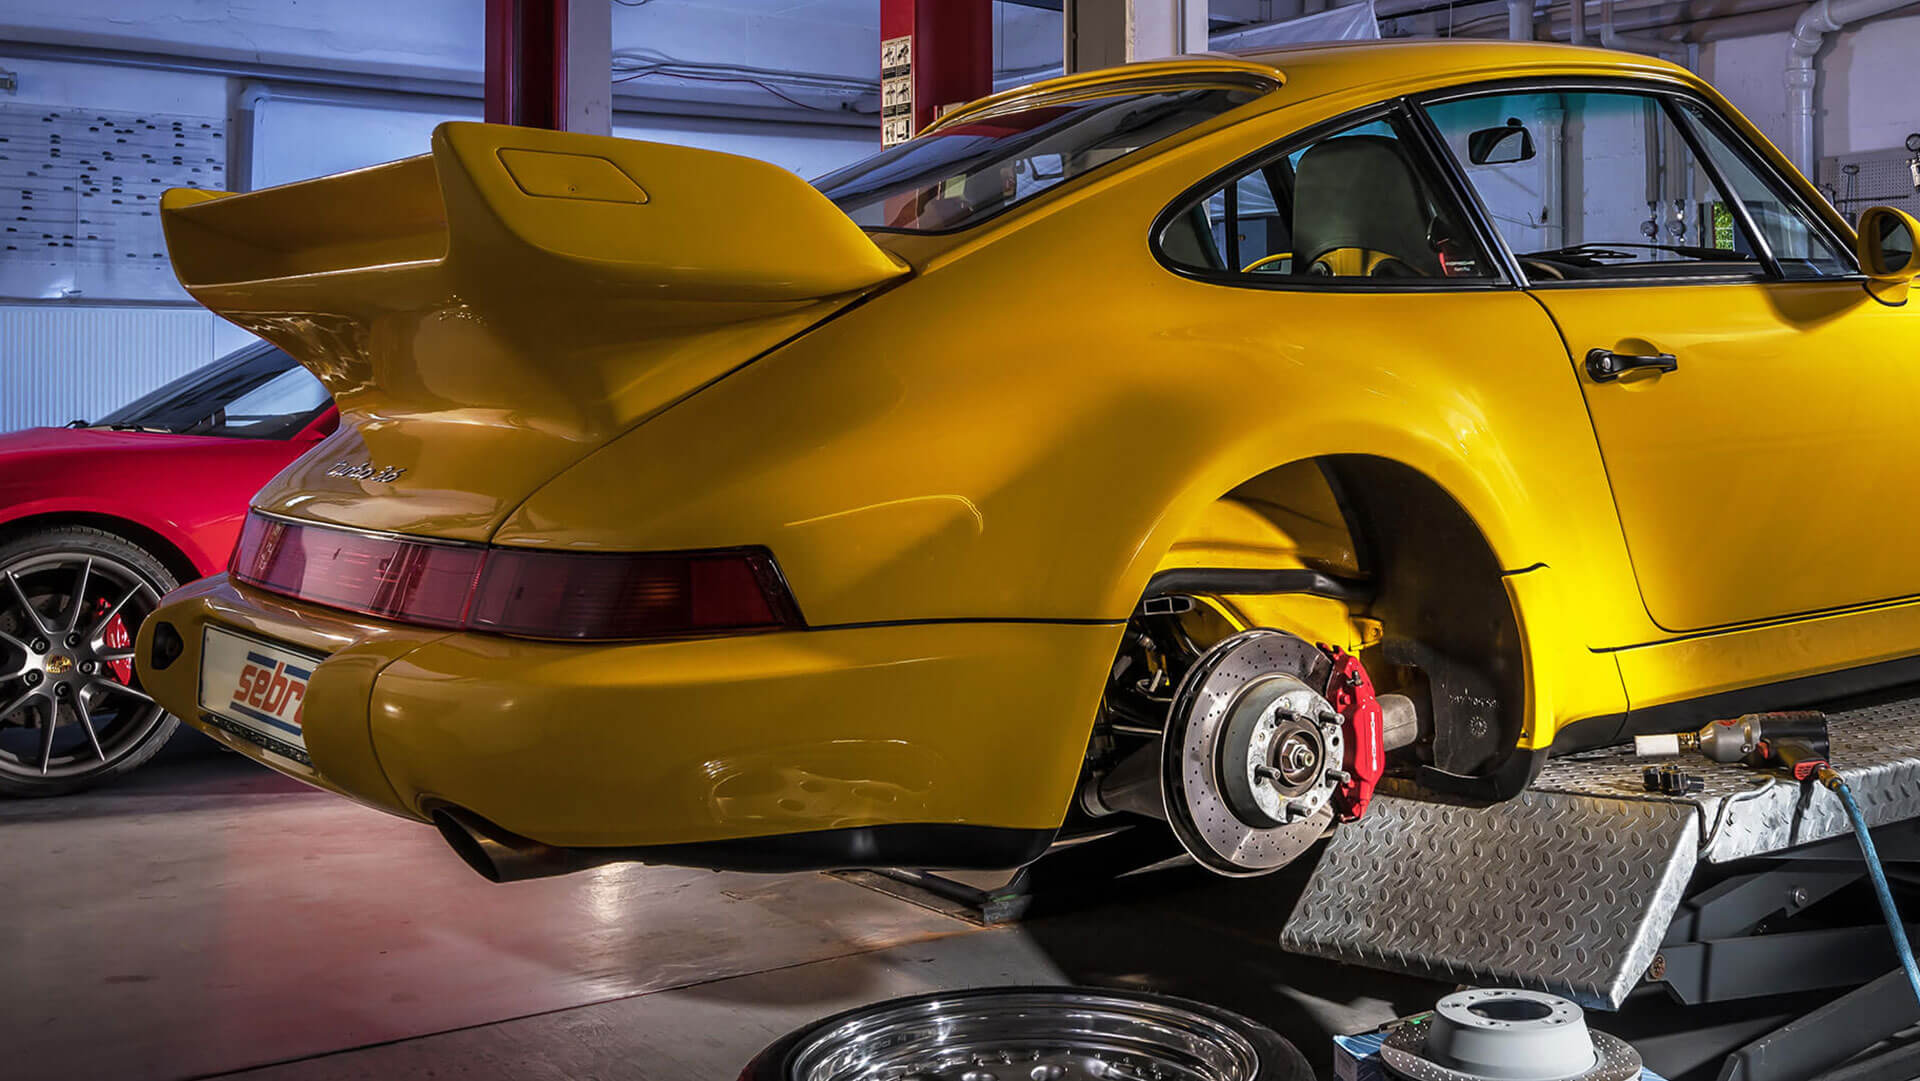 Brake discs as well as engine, drive and chassis components for Porsche workshops